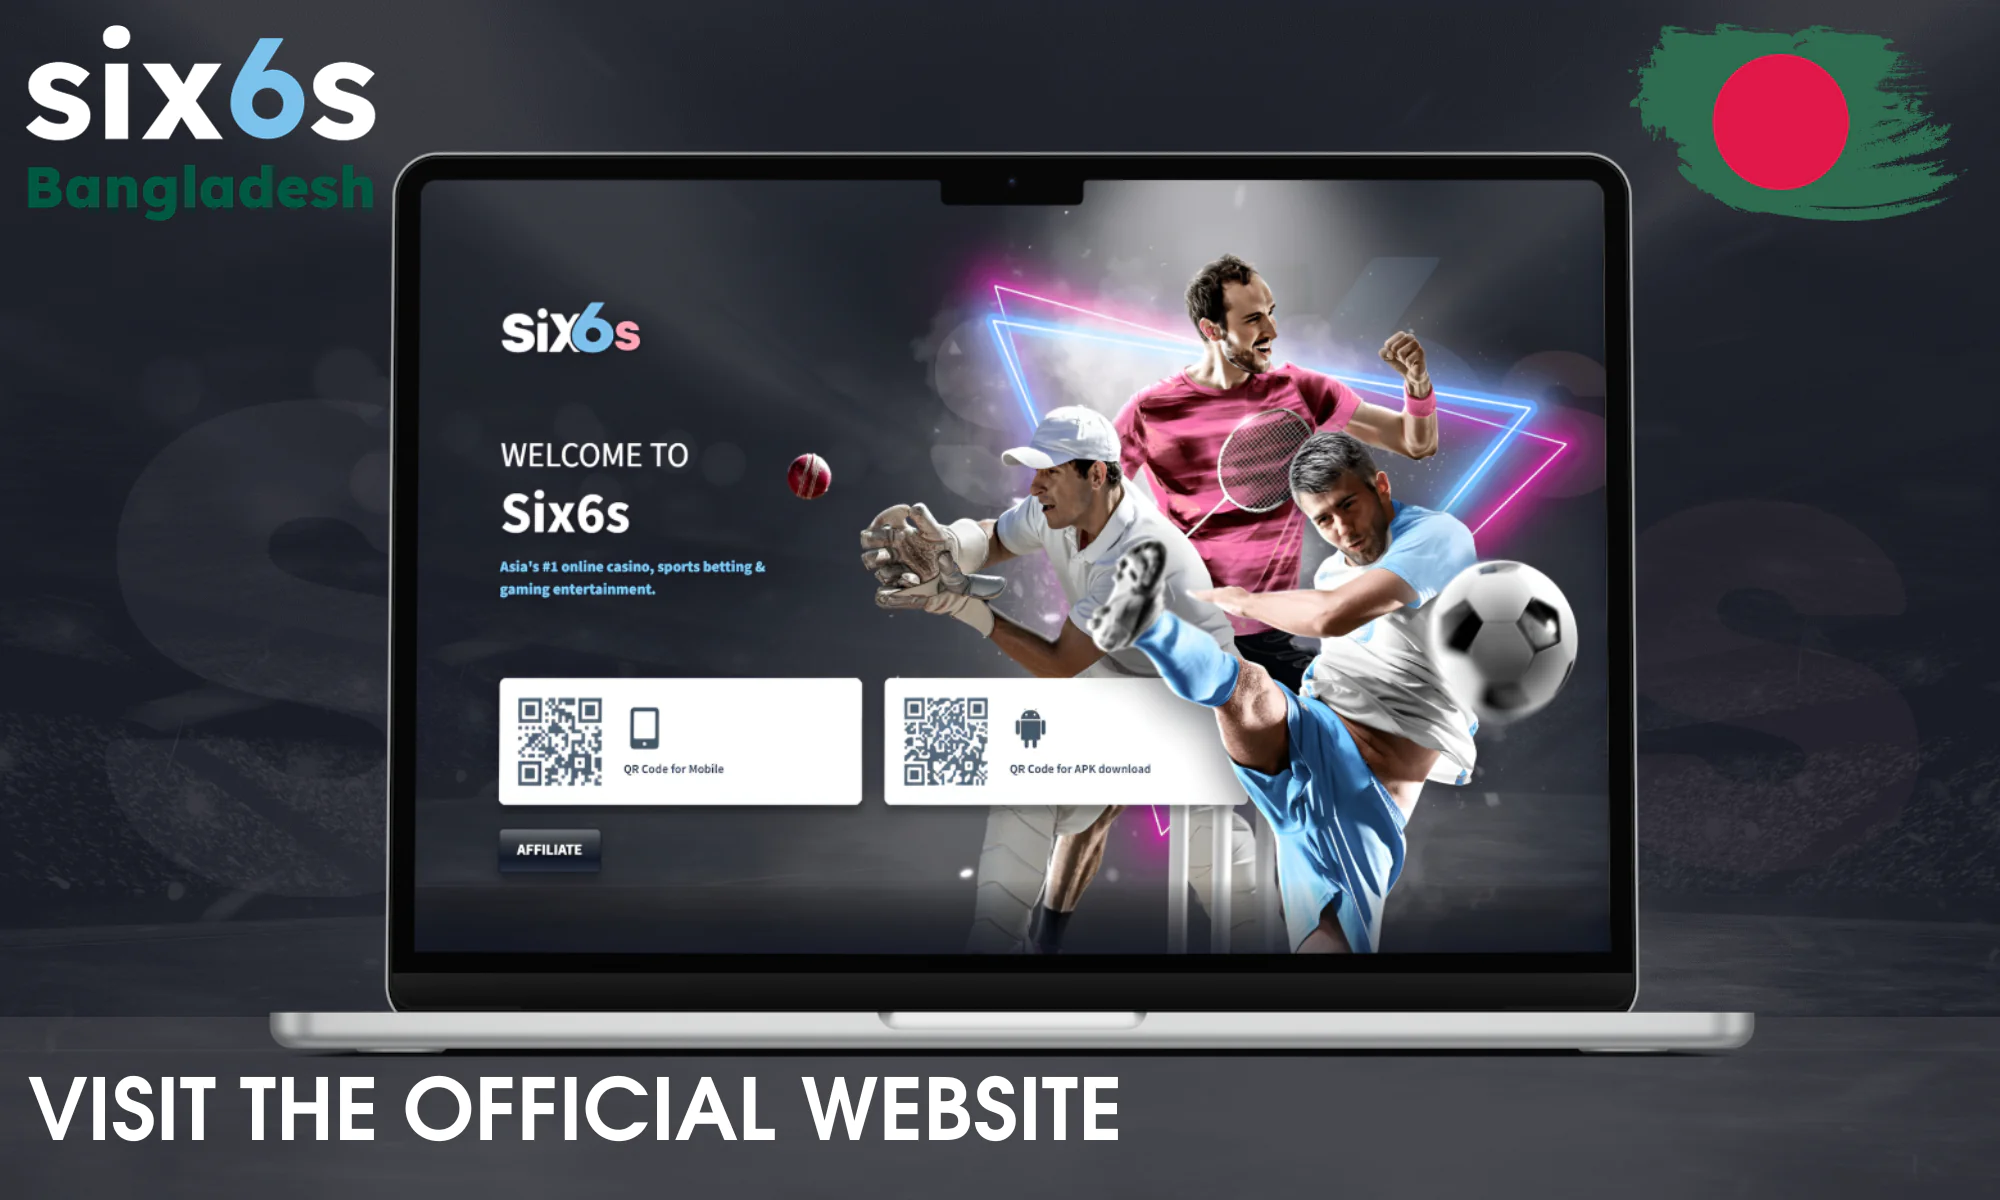 Access the official Six6s website from your PC